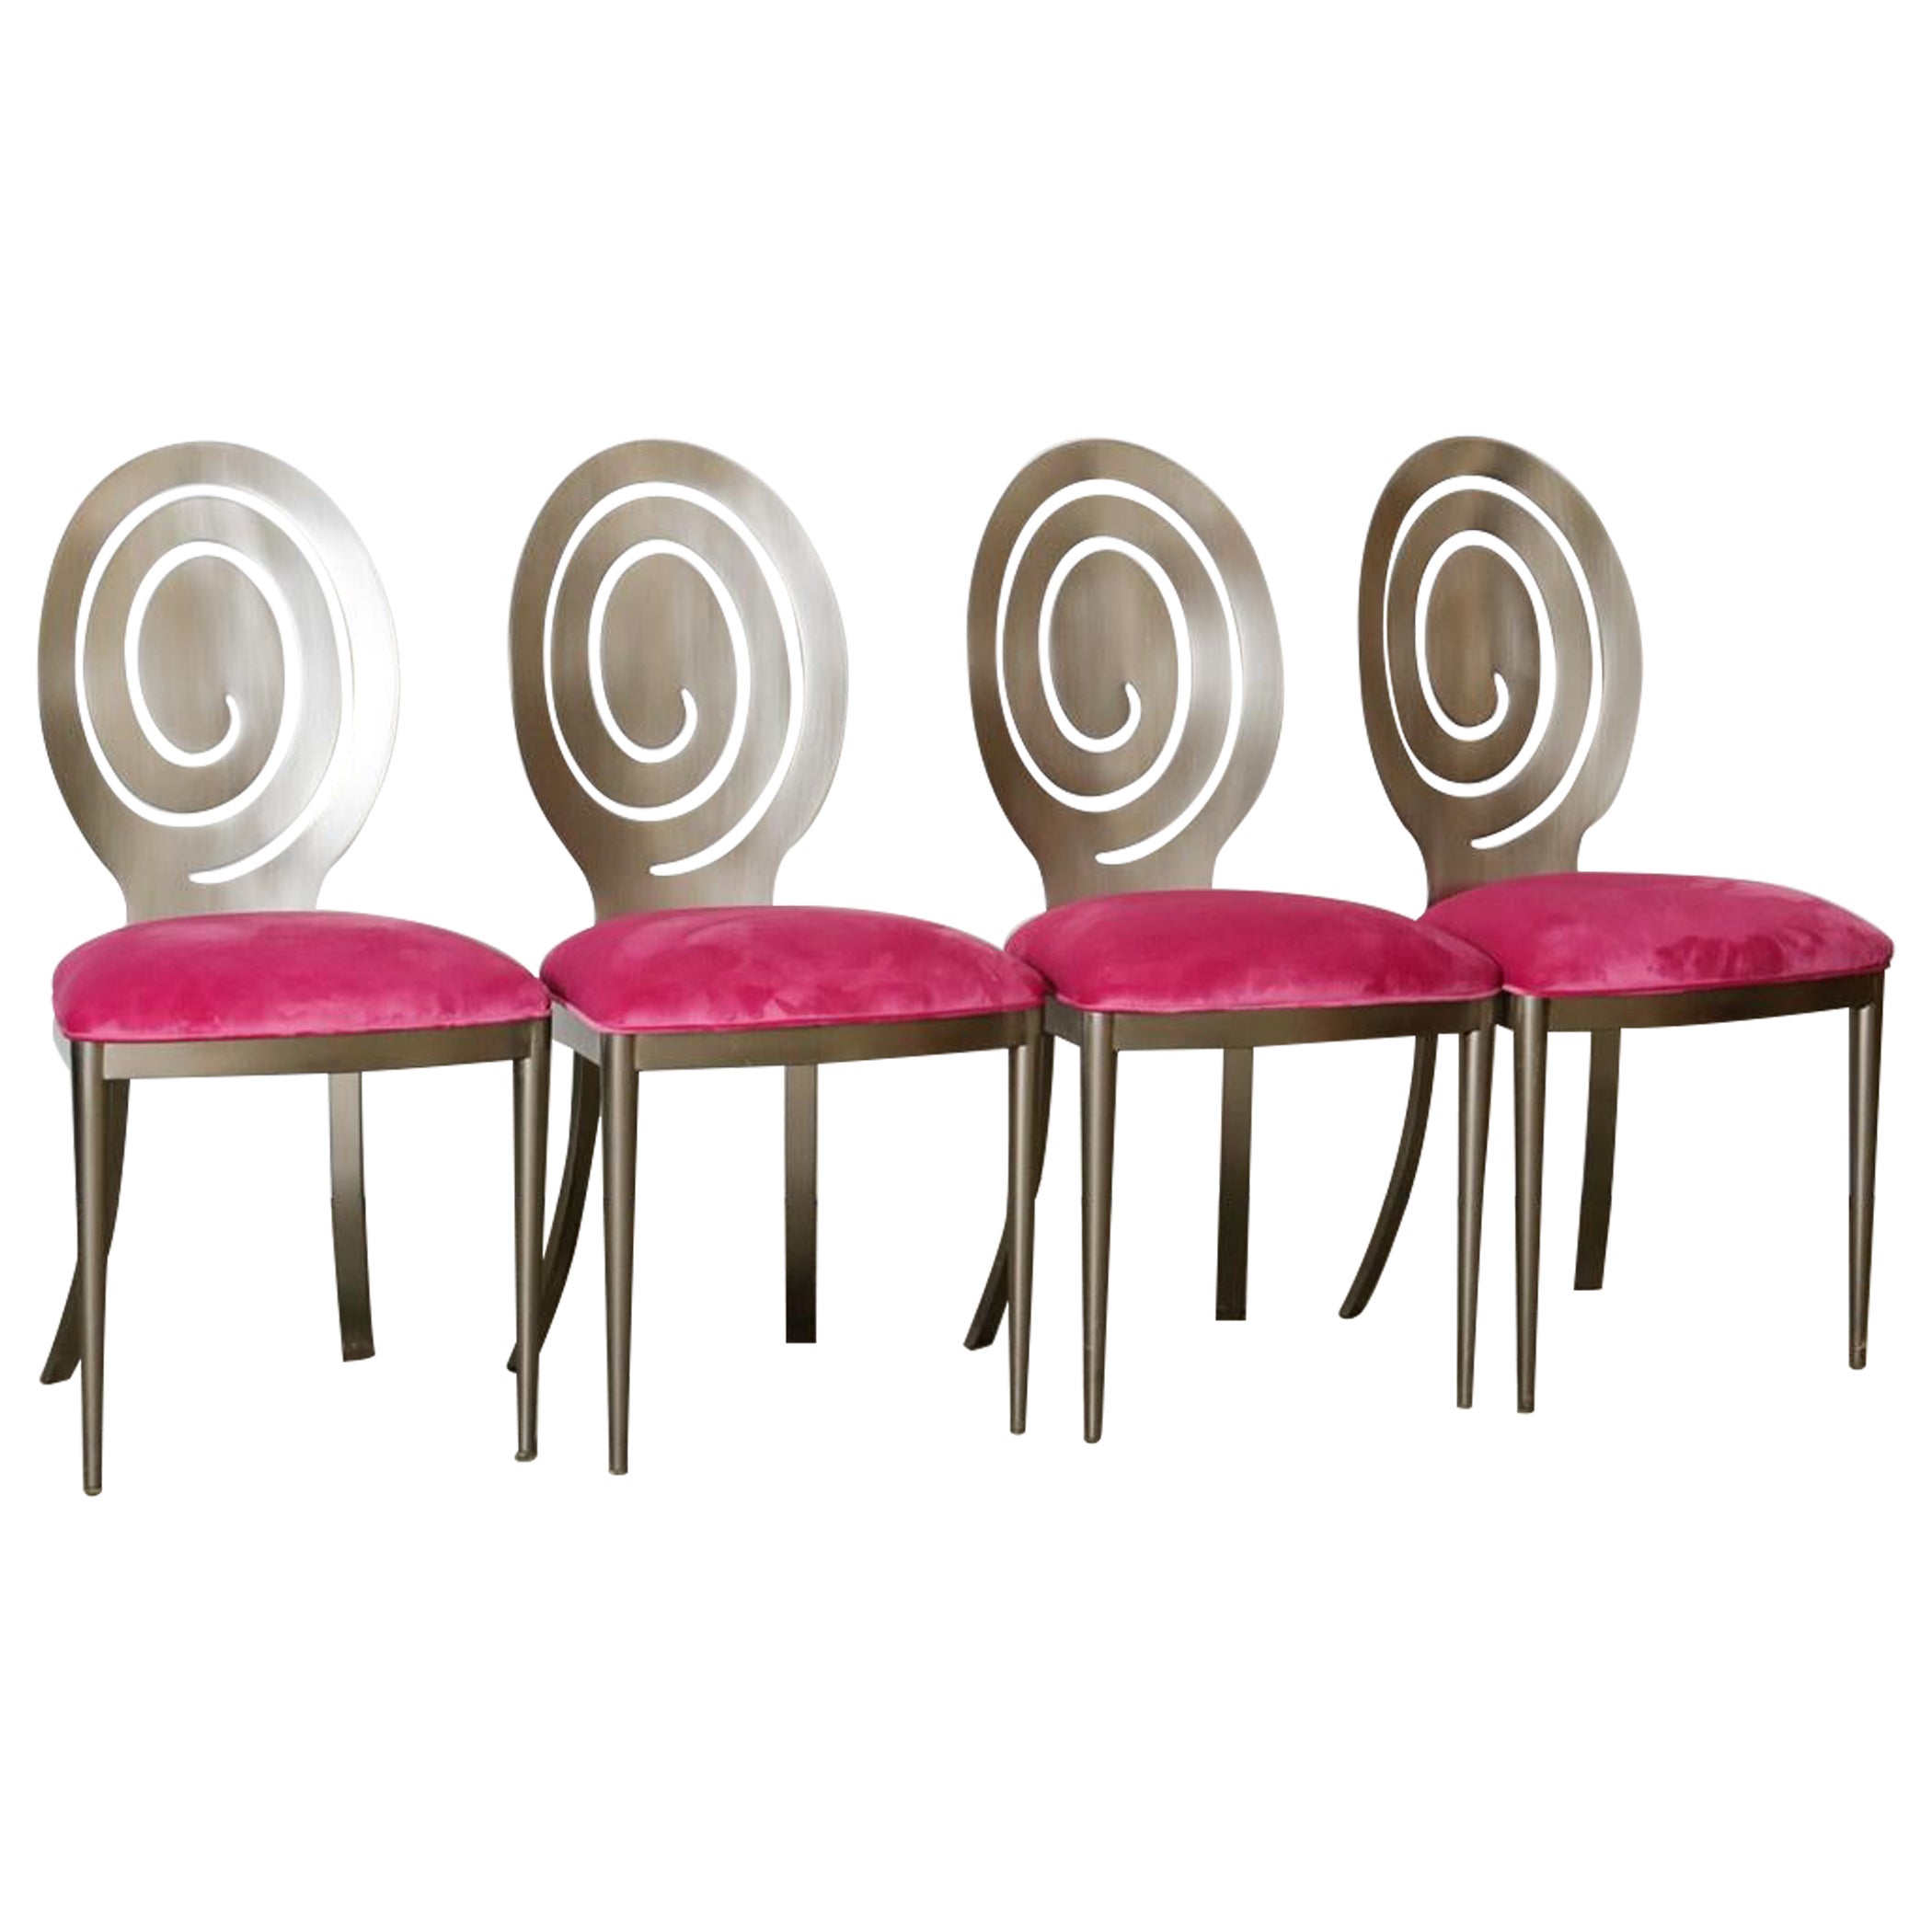 1980s Swirling Dining Chairs in Pink Velvet New Upholstery For Sale